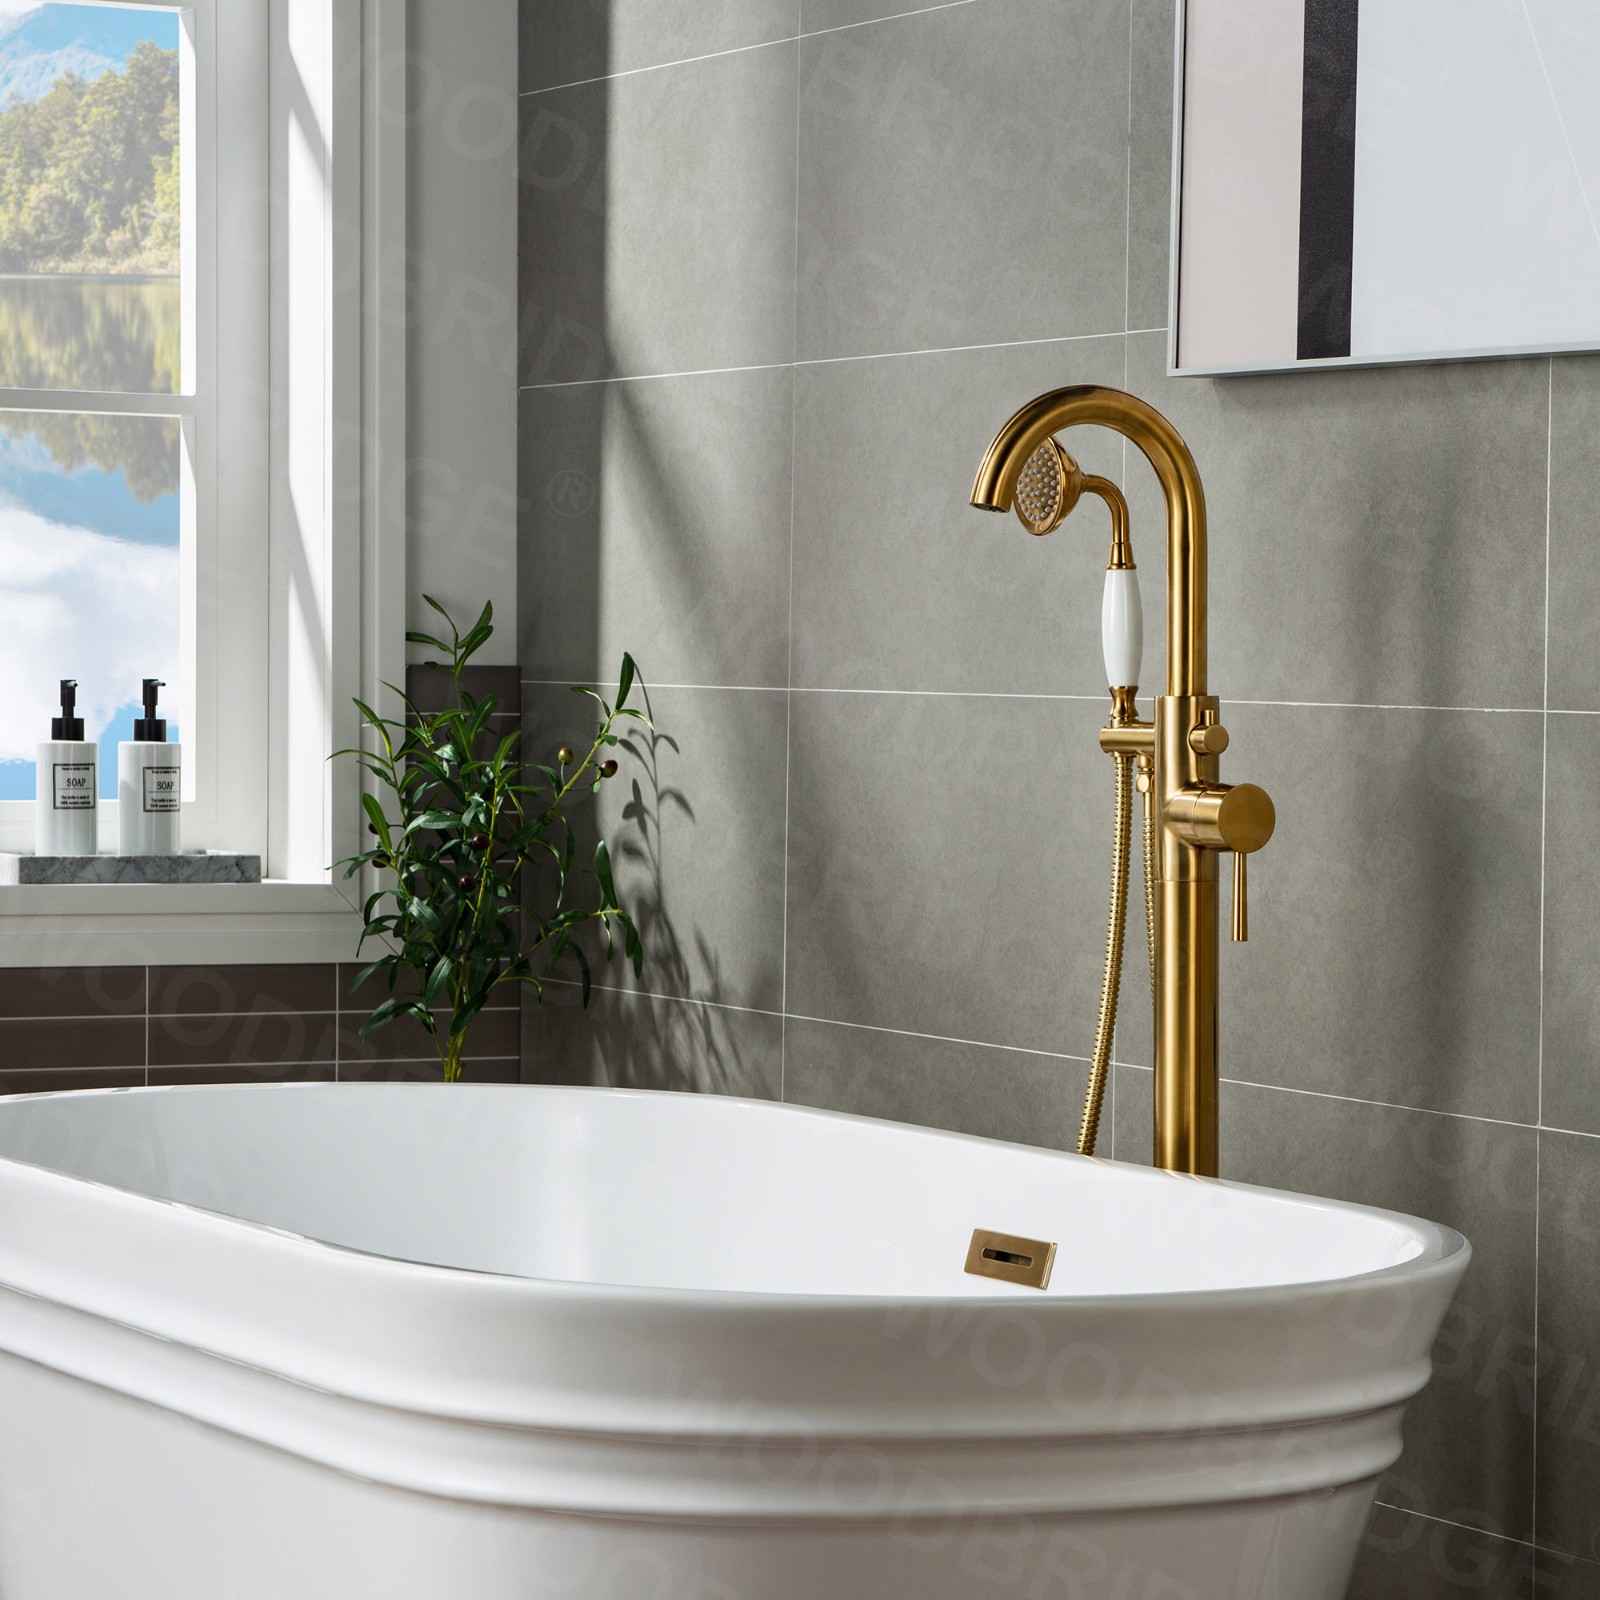  WOODBRIDGE F0007BGVT Fusion Single Handle Floor Mount Freestanding Tub Filler Faucet with Telephone Hand shower in Brushed Gold Finish._6121